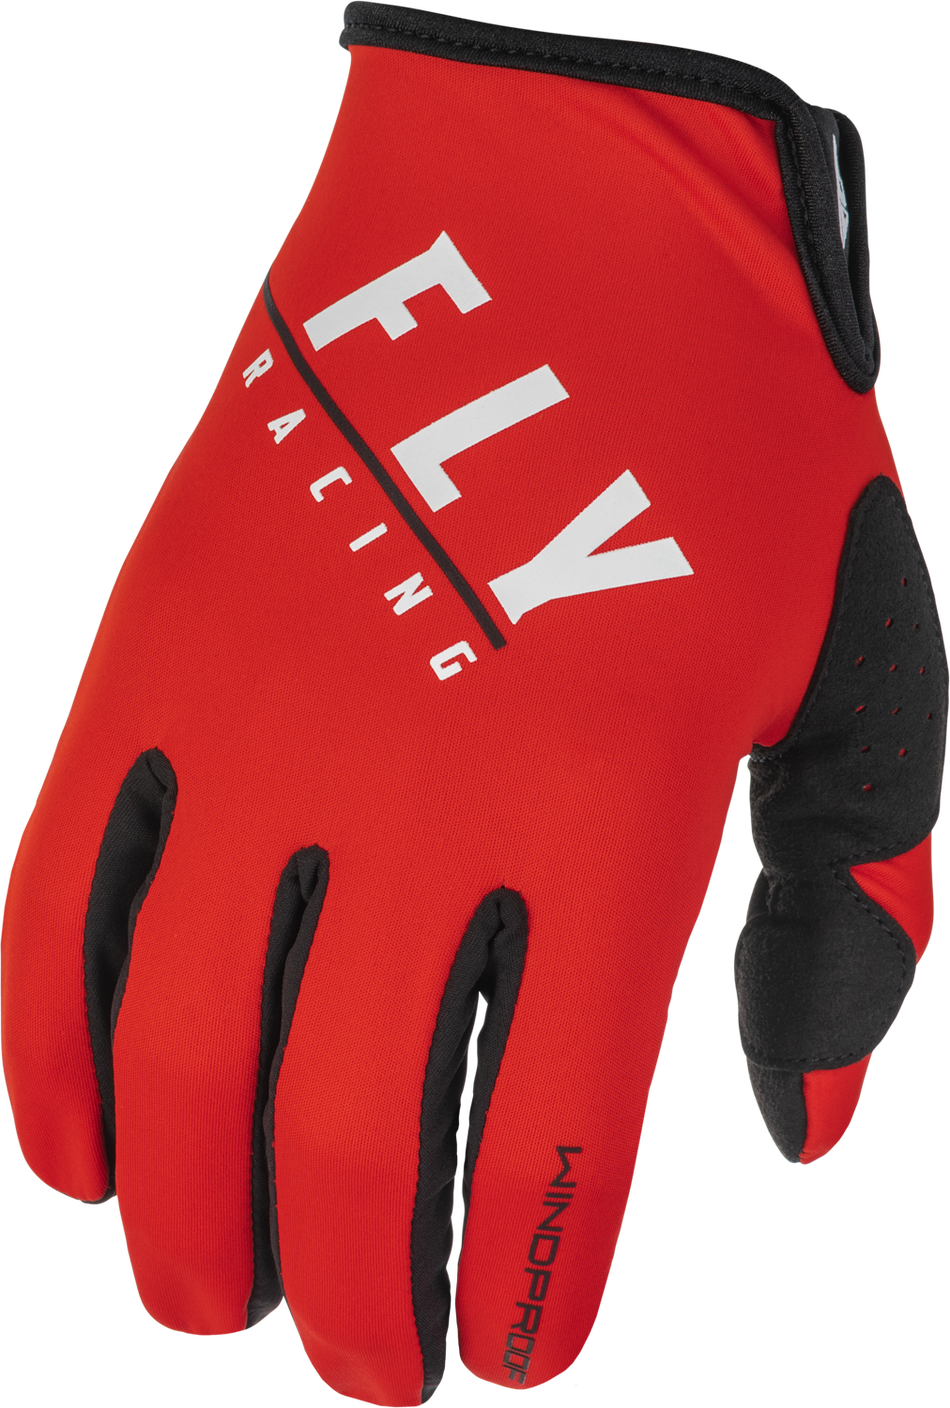 FLY RACING Windproof Gloves Black/Red Sz 07 371-14307